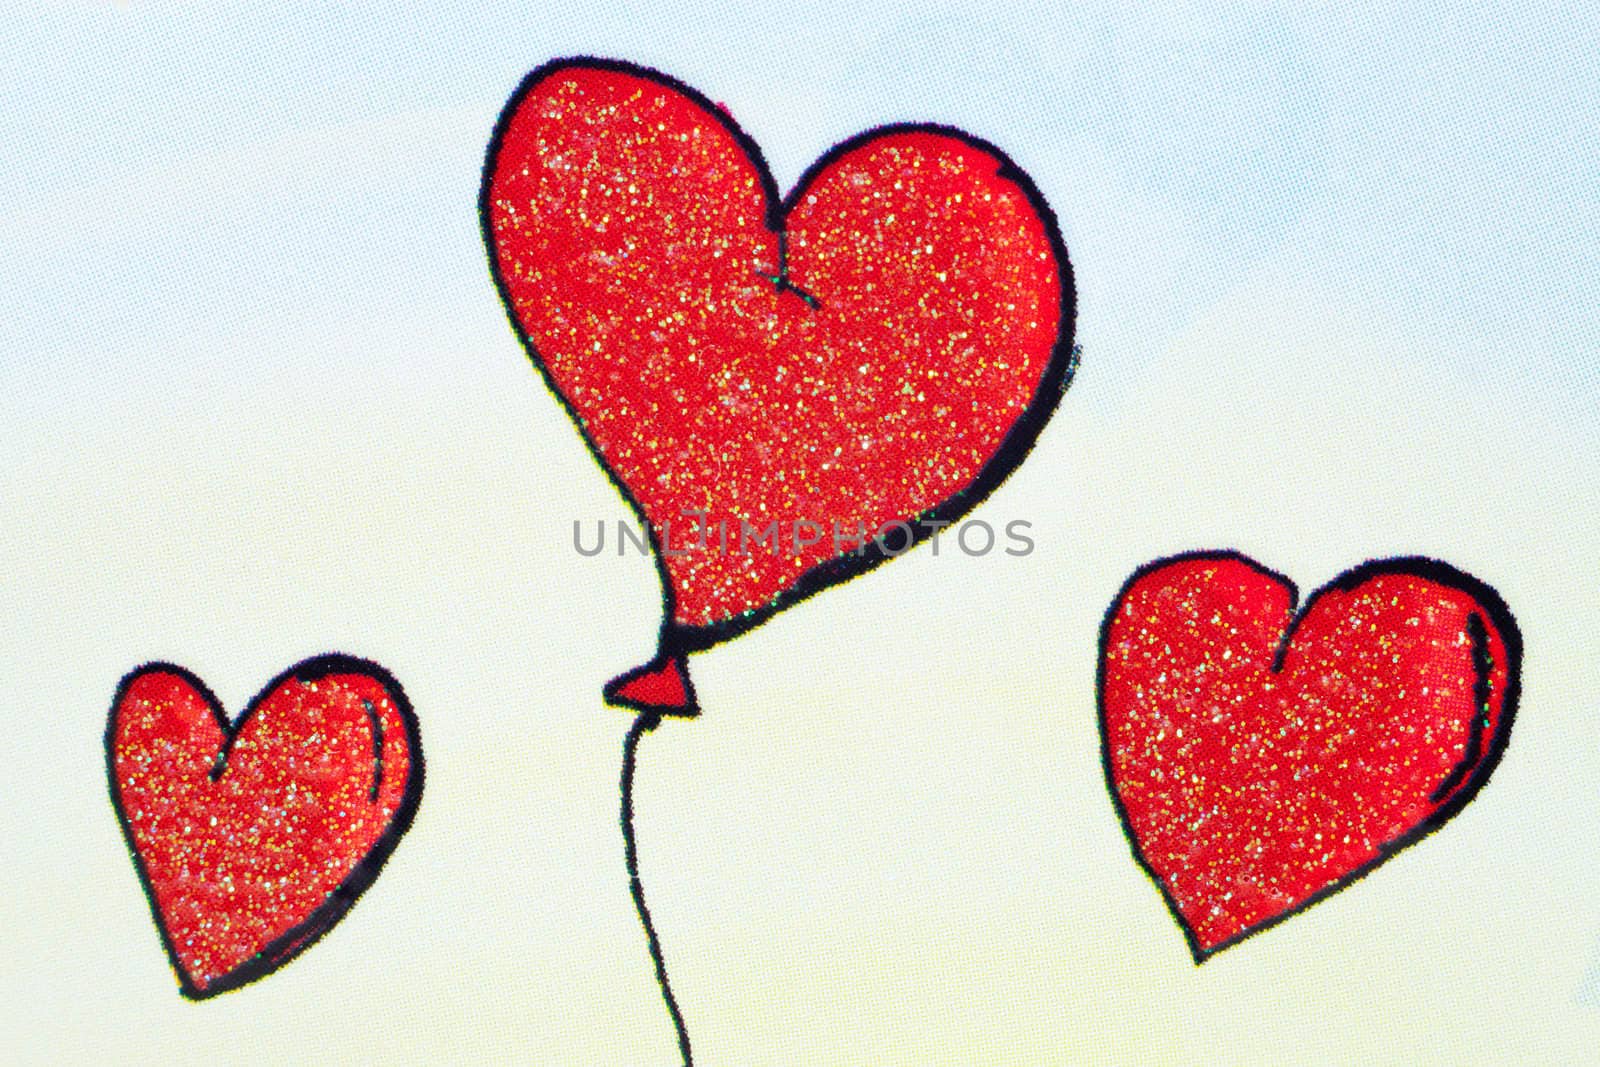 Three red baloon hearts on colorful background
